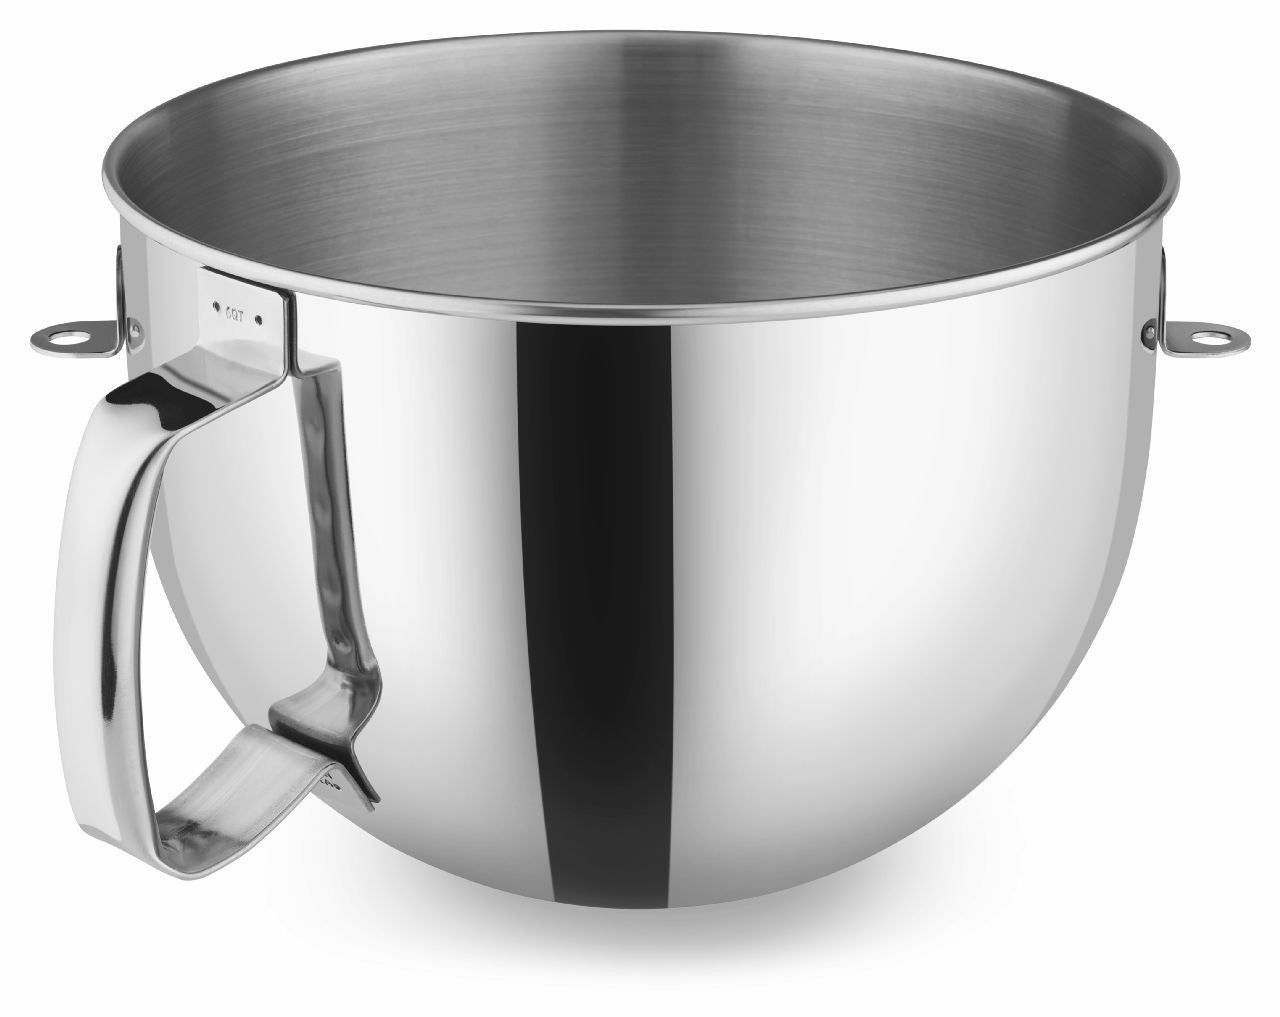 KitchenaidAid 6-Qt Bowl Polished Stainless Steel with Comfortable Handle KN2B6PEH